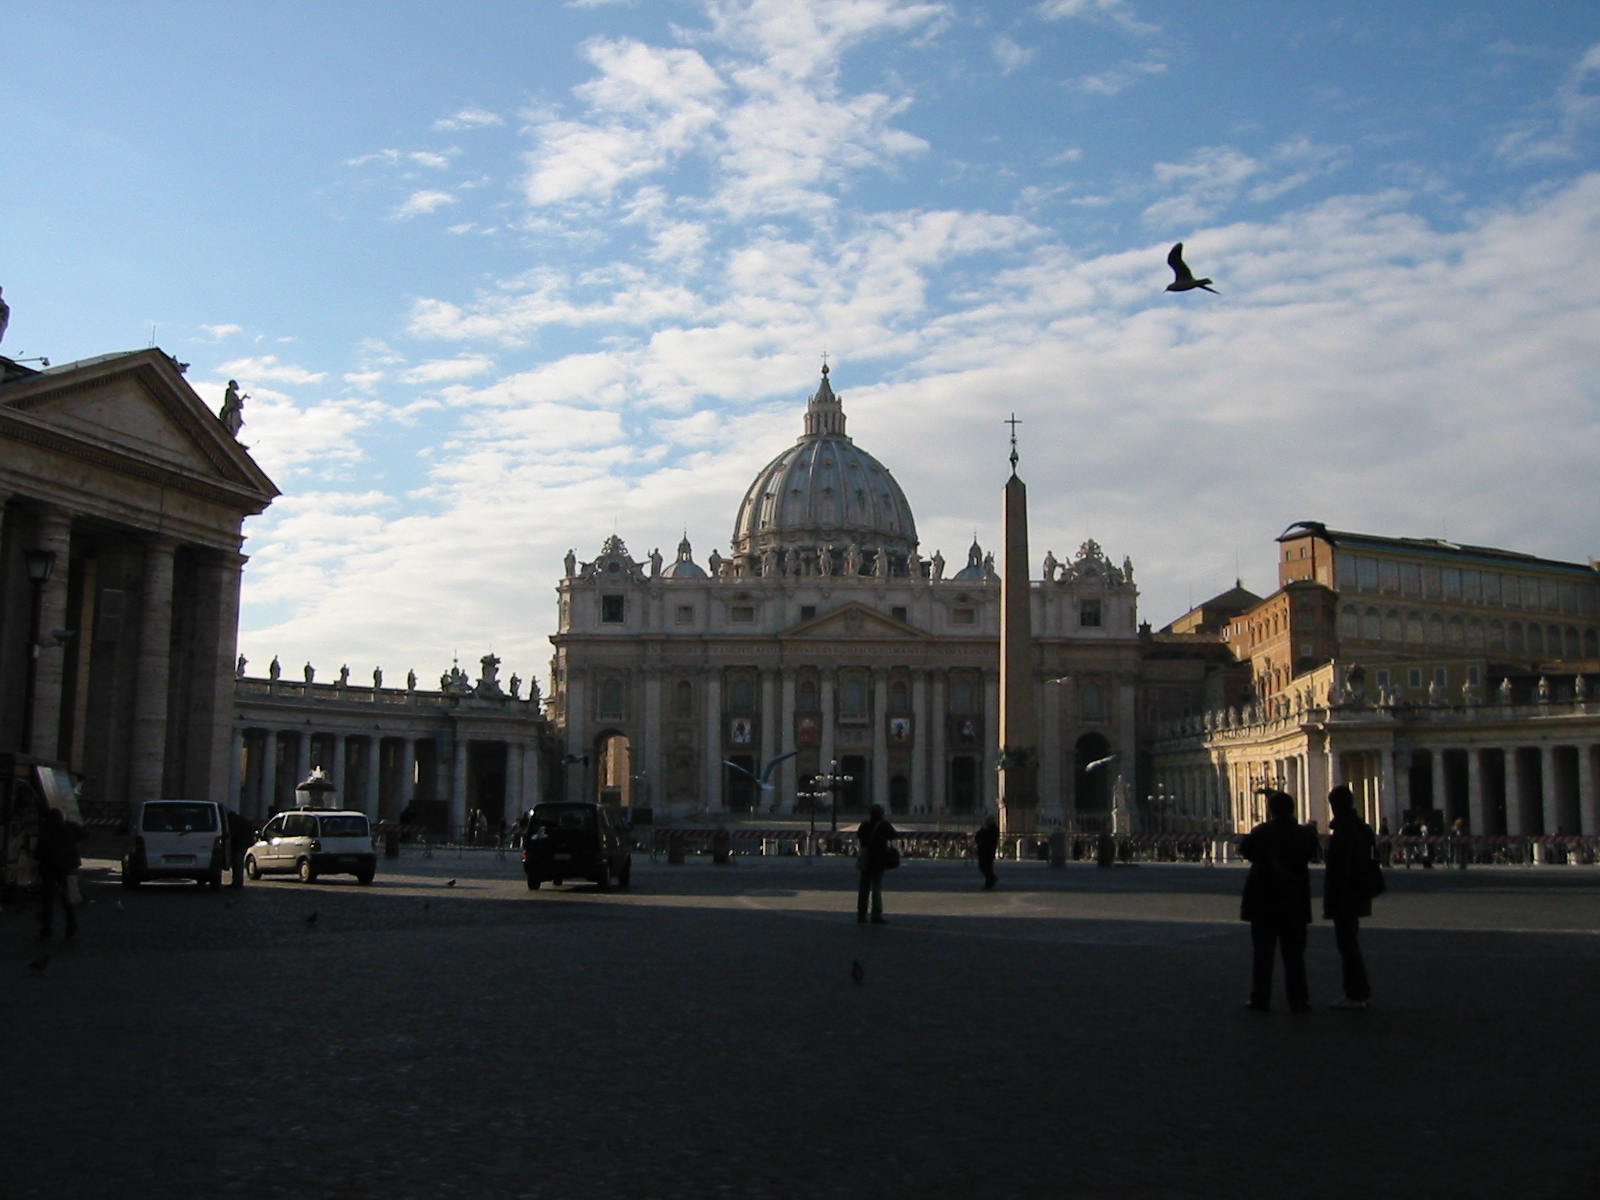 Approaching St. Peter's Square